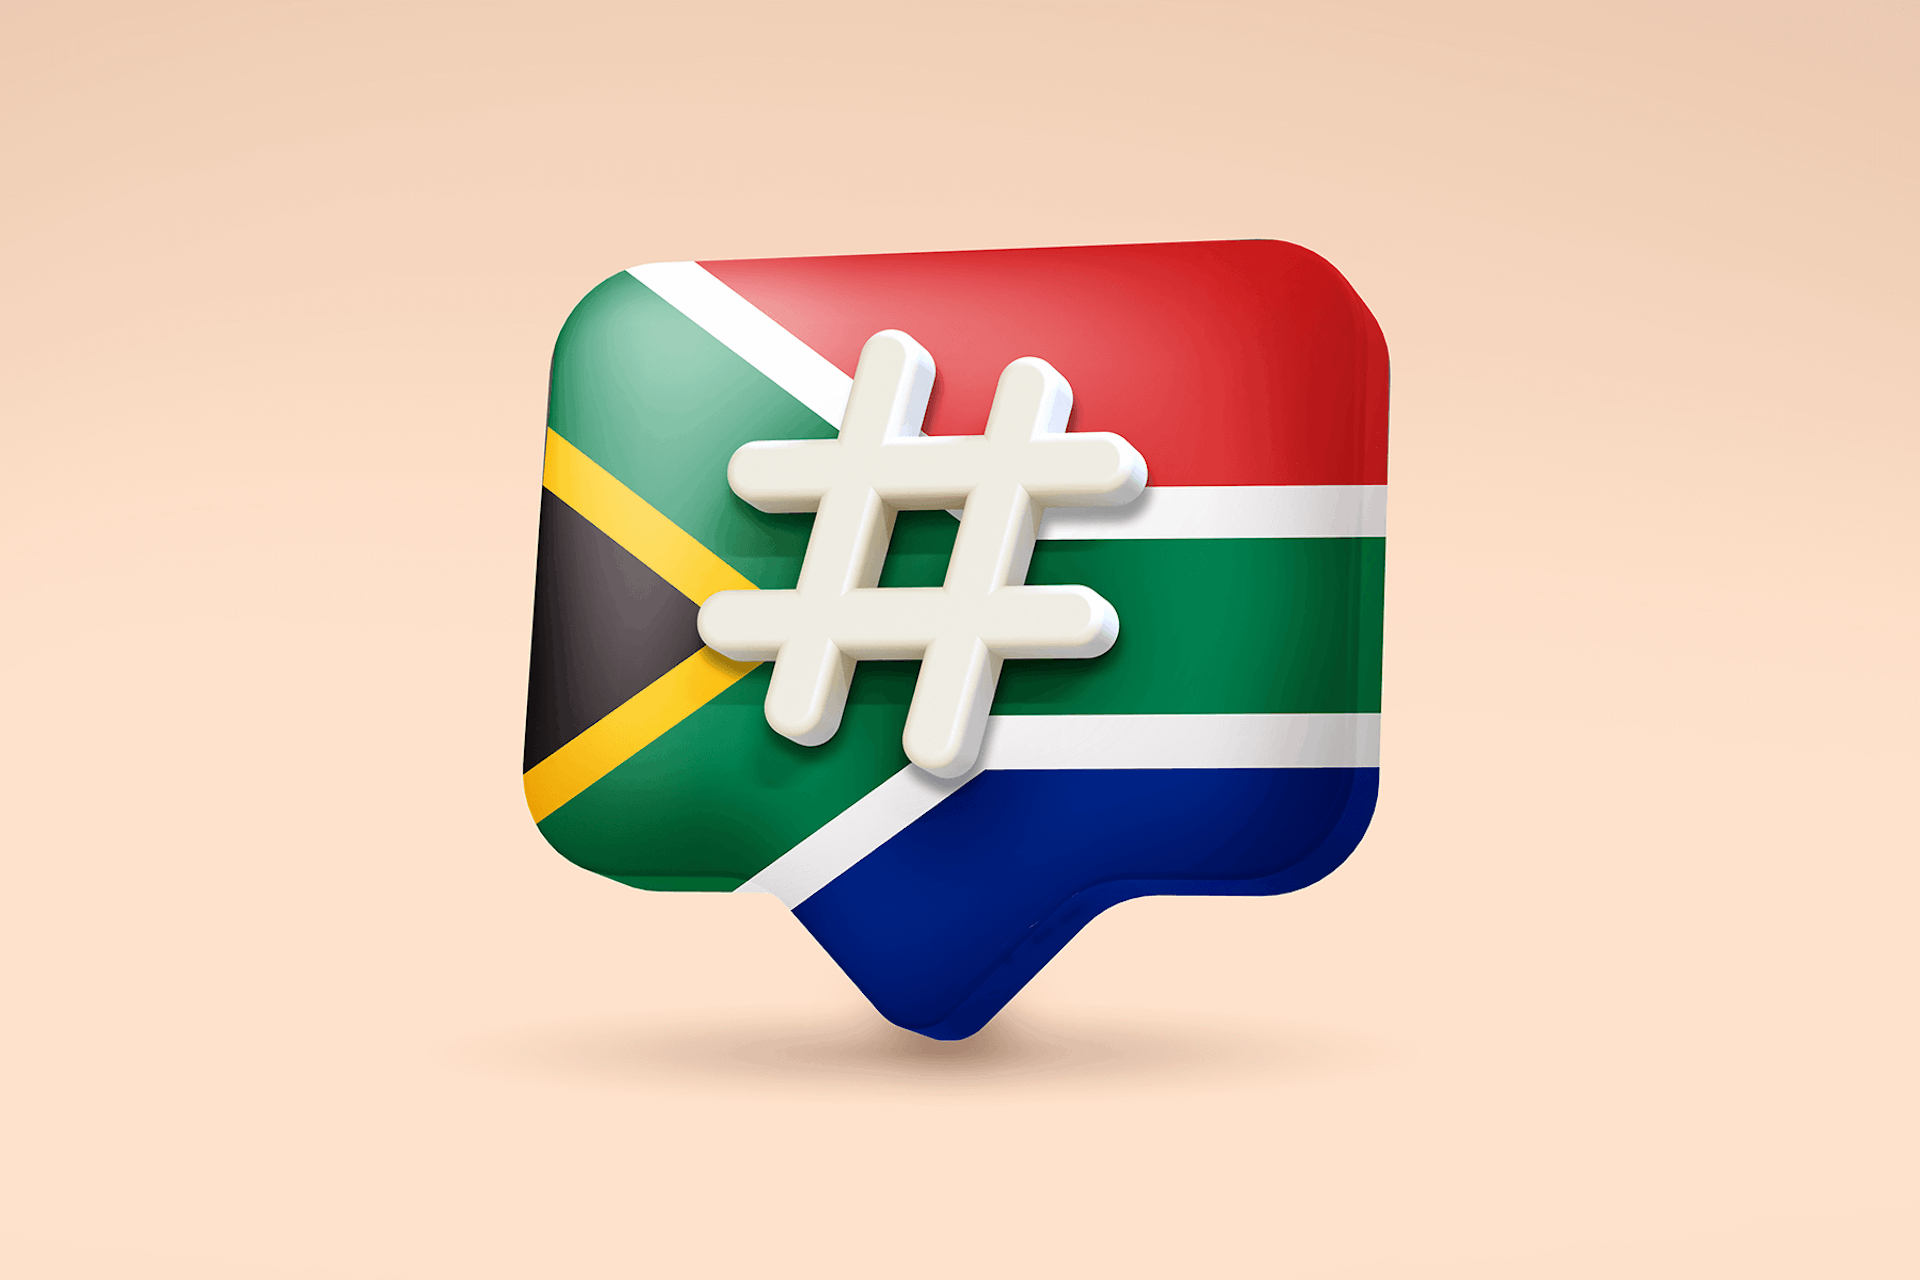 3D Illustration of the South African flag with a hashtag sign in it to showcase the top trending hashtags in South Africa.